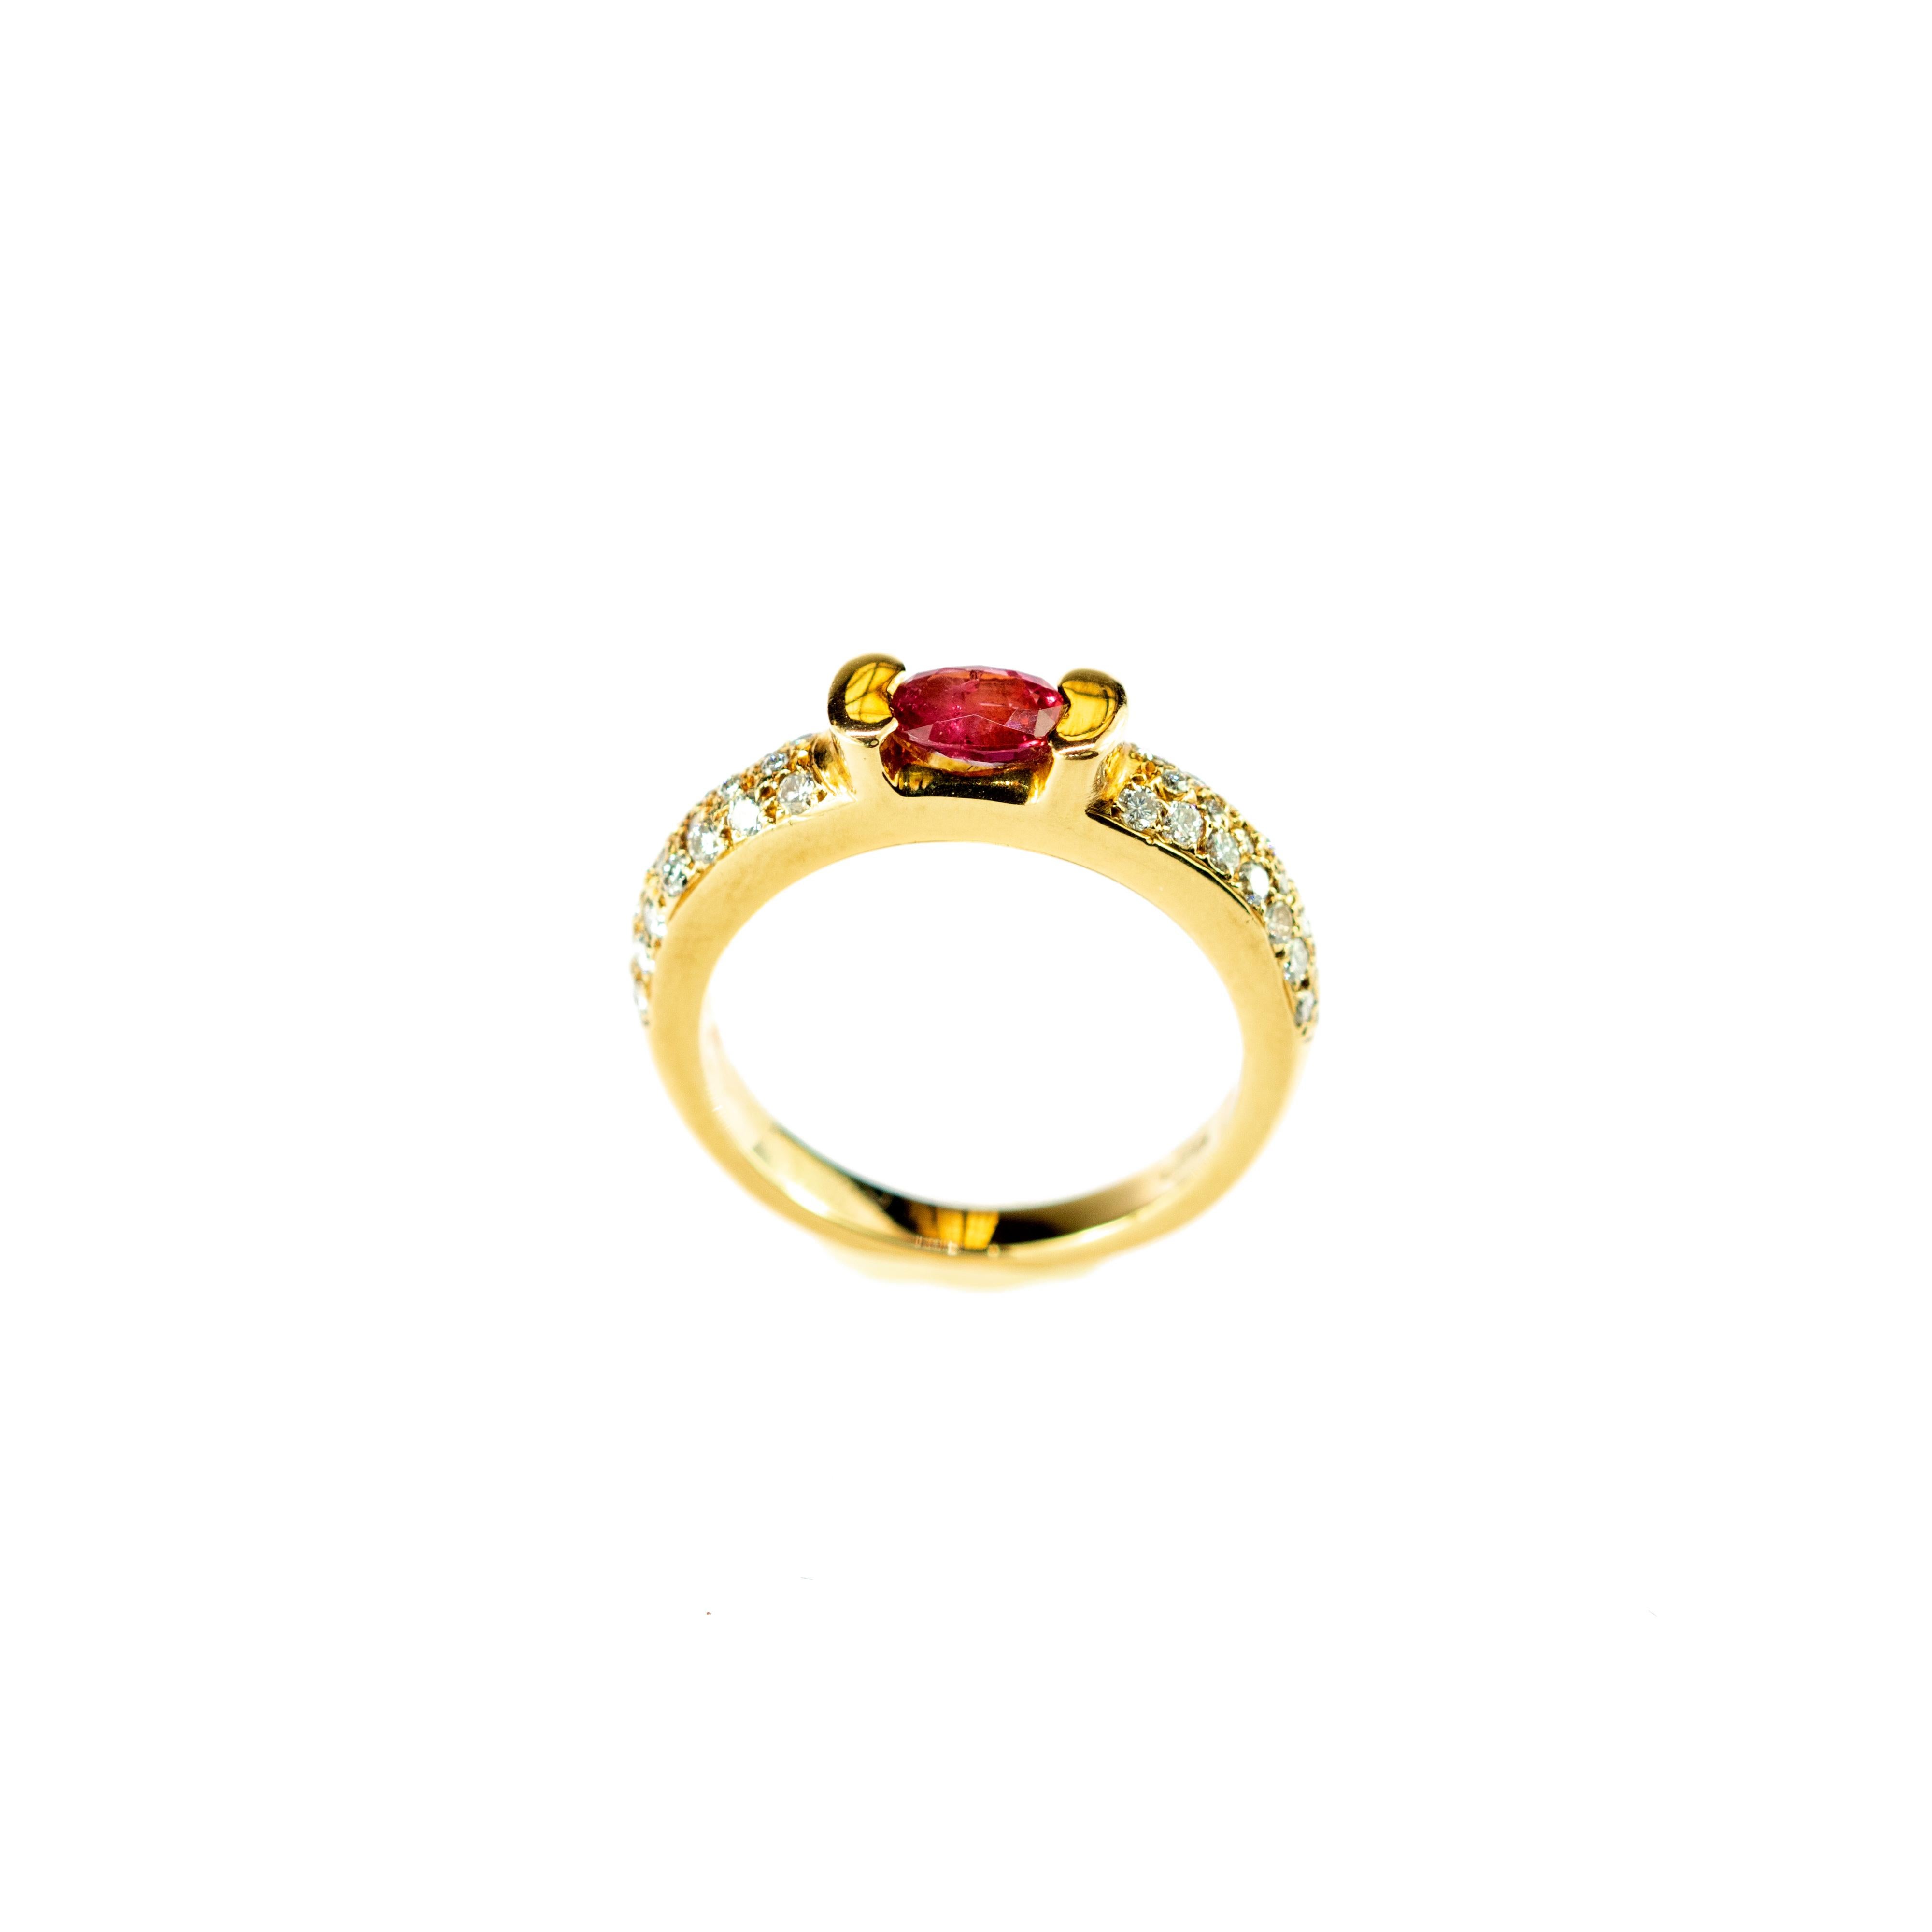 Vintage cabochon ruby engagement ring with diamonds subtly united by 18 karat gold. This is an antique ring style with a romantic Victorian influence.
 
This jewel is inspired by romanticism and passion. It has delicate touches adding each gem in a